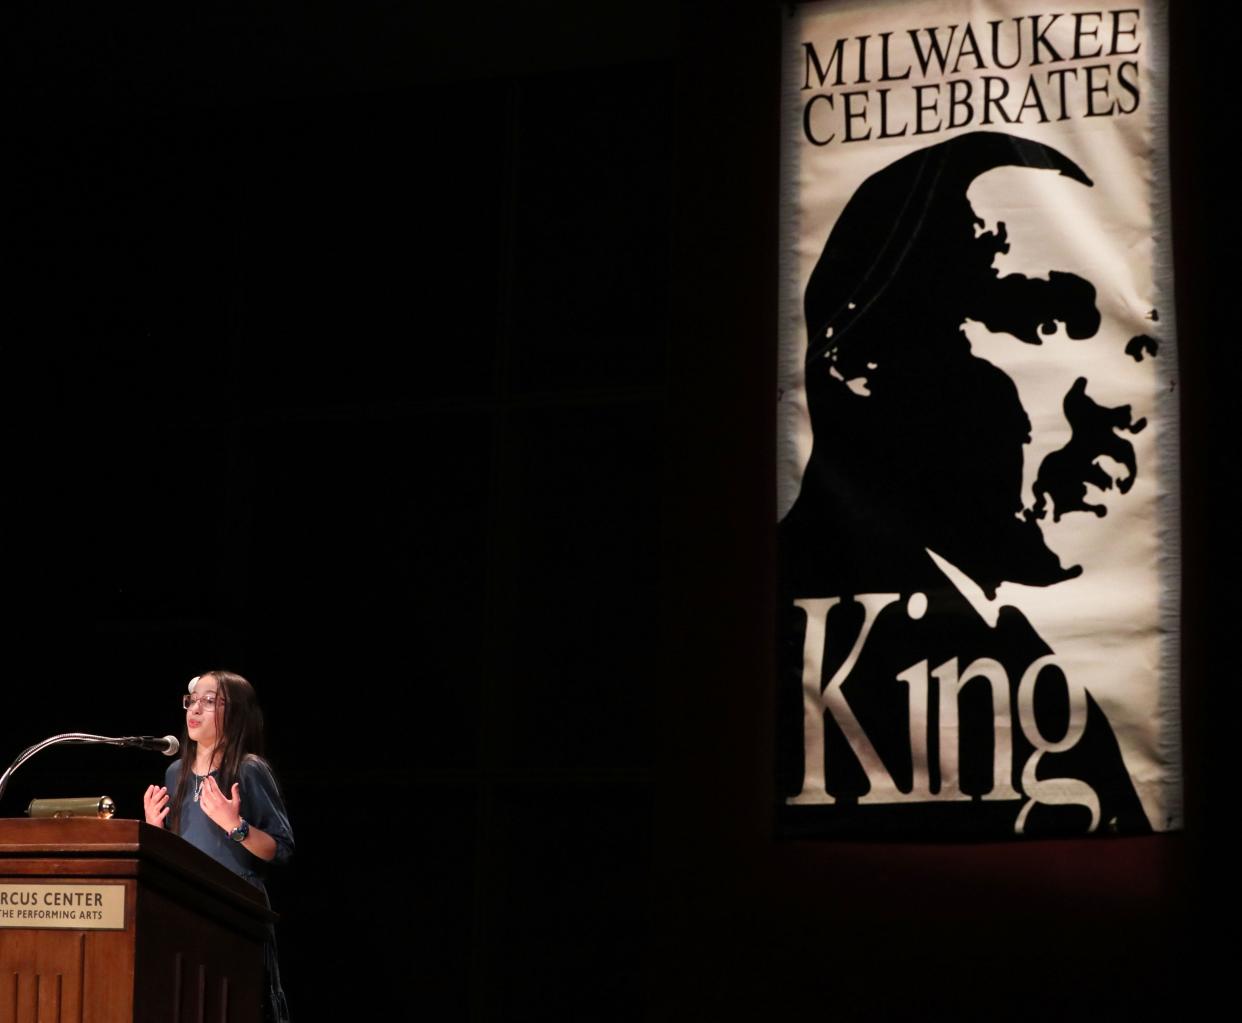 The Marcus Performing Arts Center's Dr. Martin Luther King Jr. Birthday Celebration will be held Jan. 15 in Uihlein Hall.